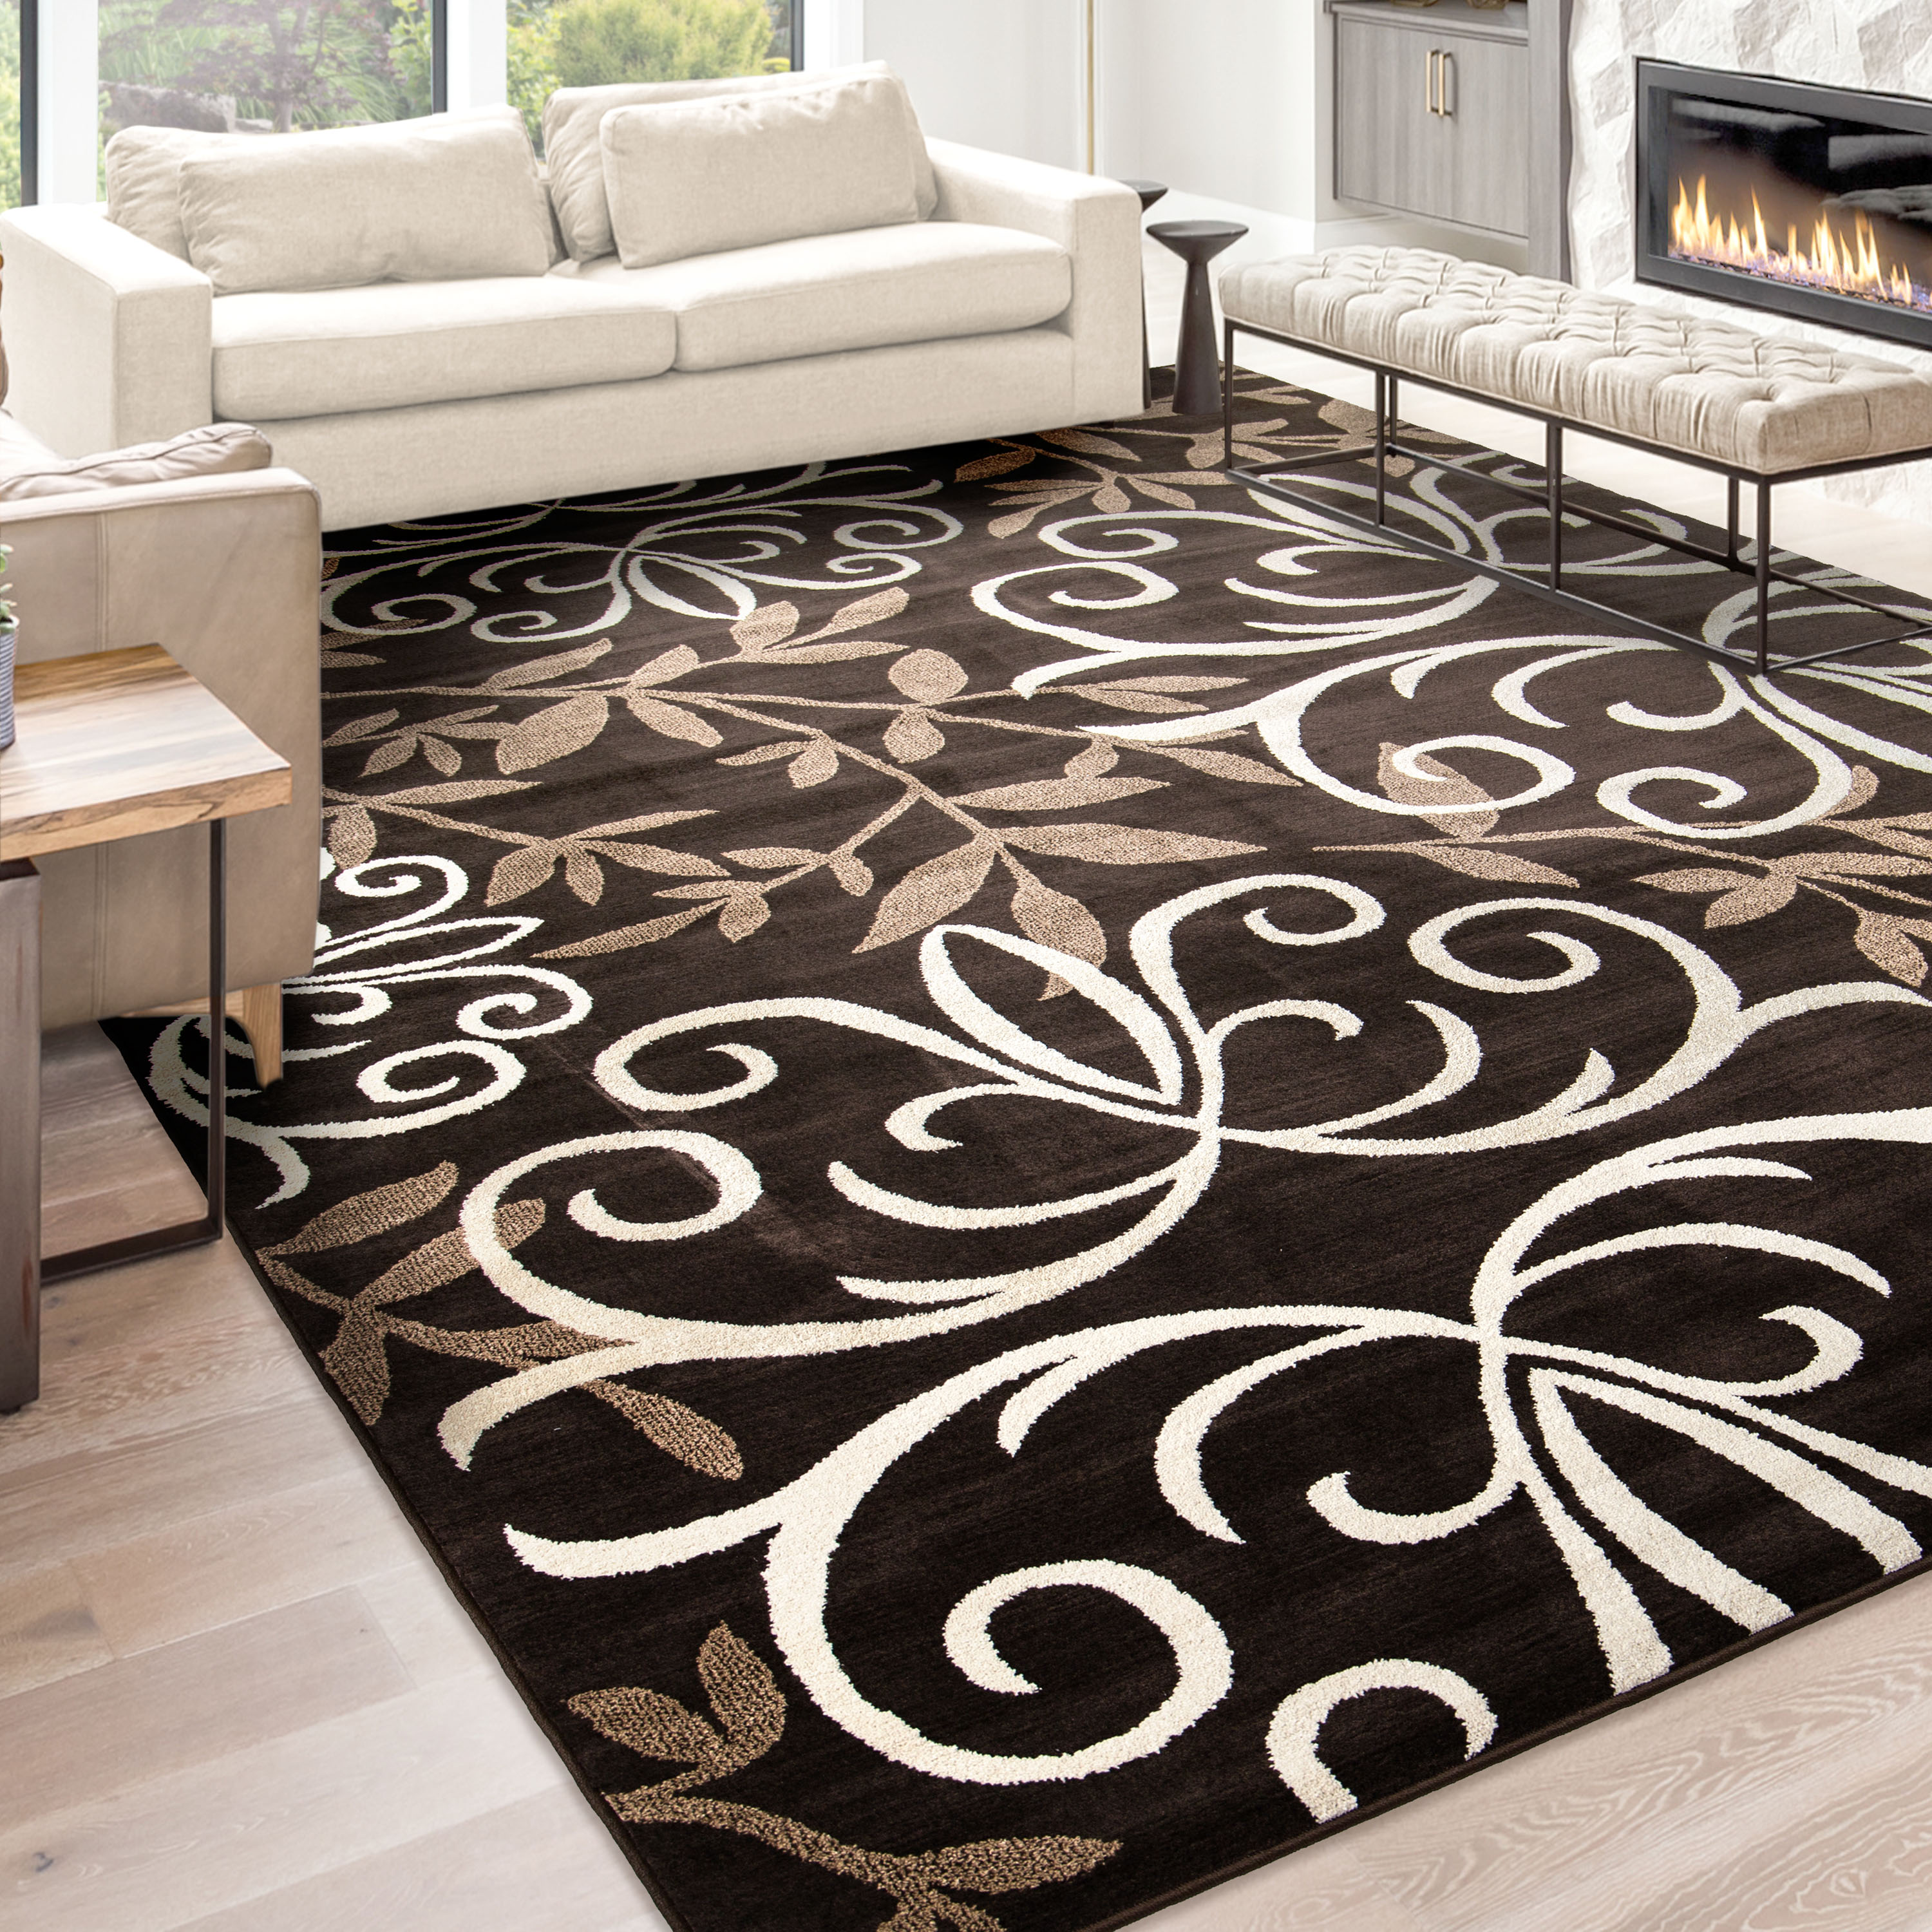 Better Homes & Gardens Iron Fleur Area Rug, Brown, 9' x 13' - image 1 of 10